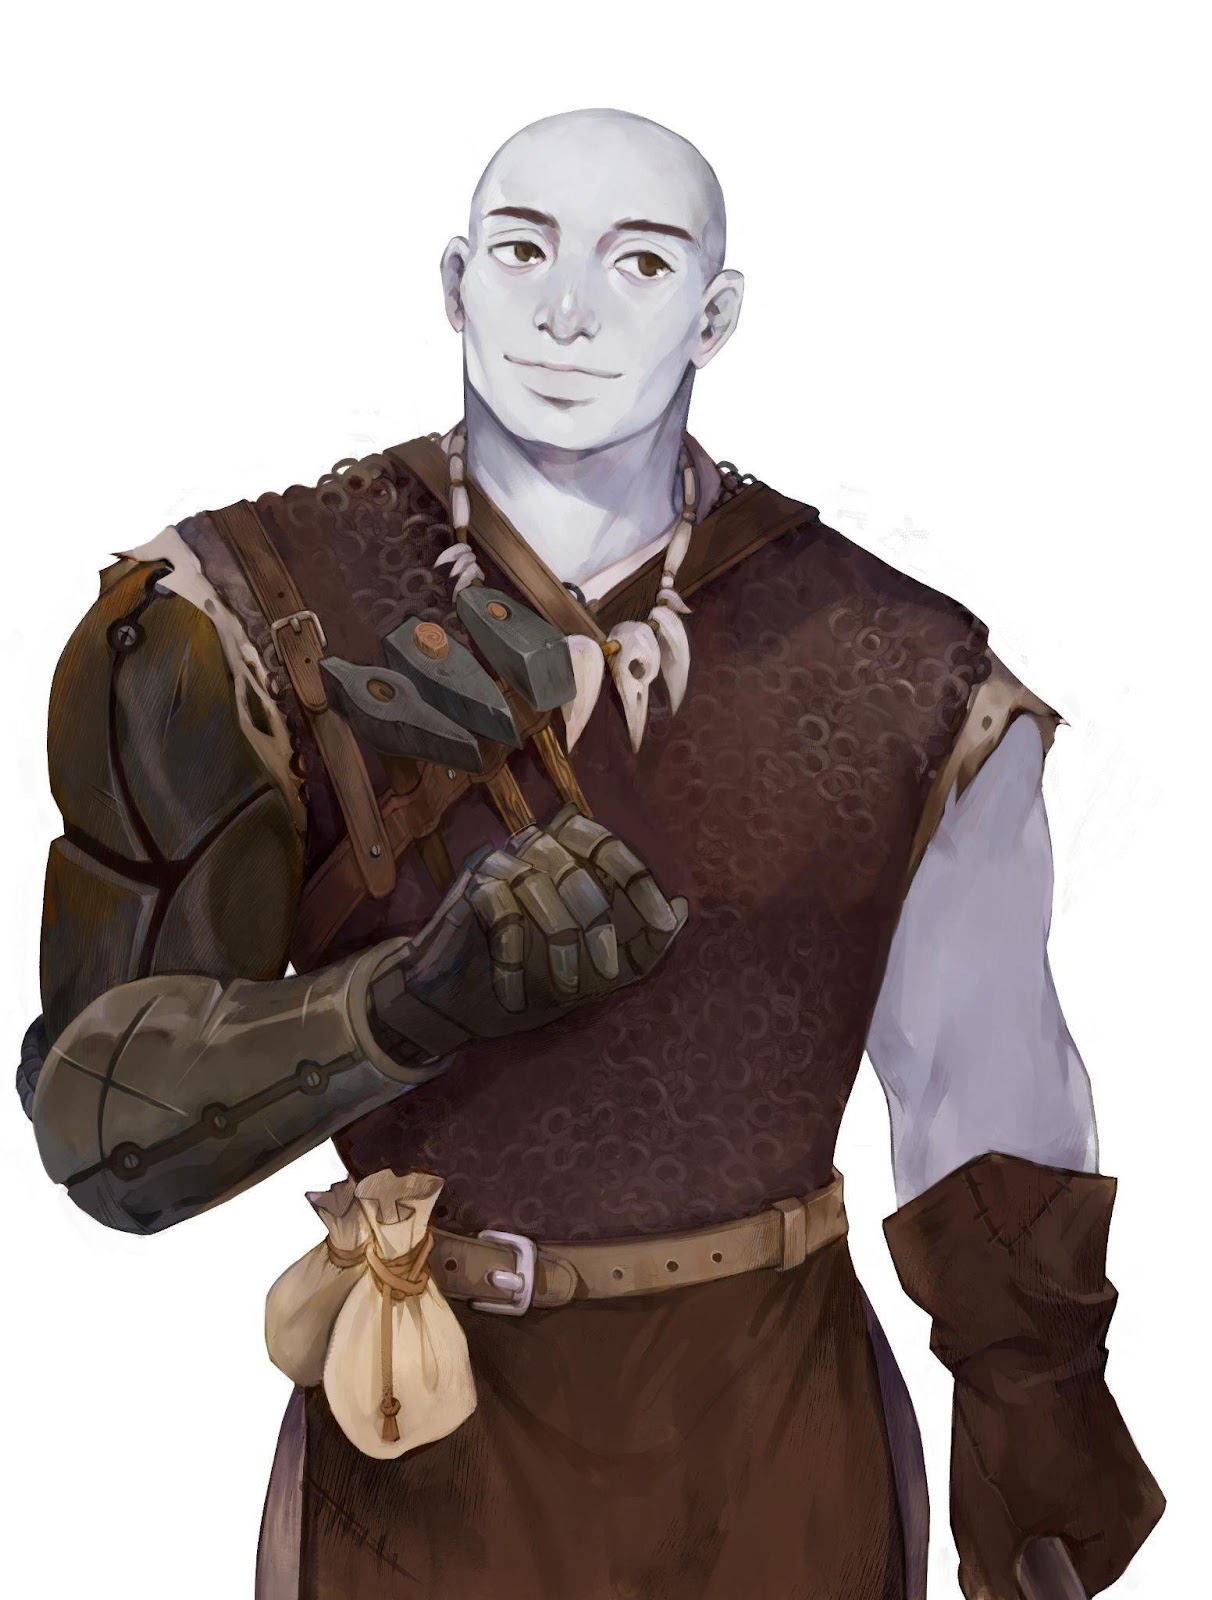 A male Goliath Artificer with a prosthetic robotic arm.